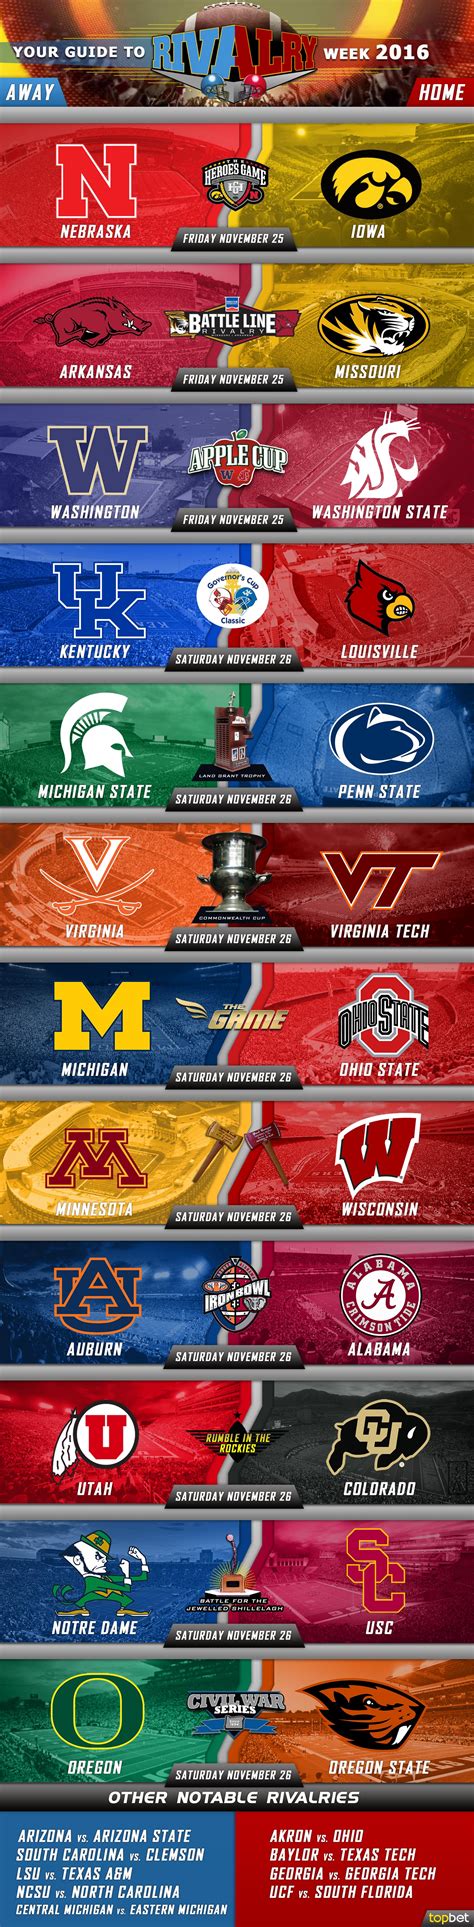 ncaa college football rivalry week   infographic